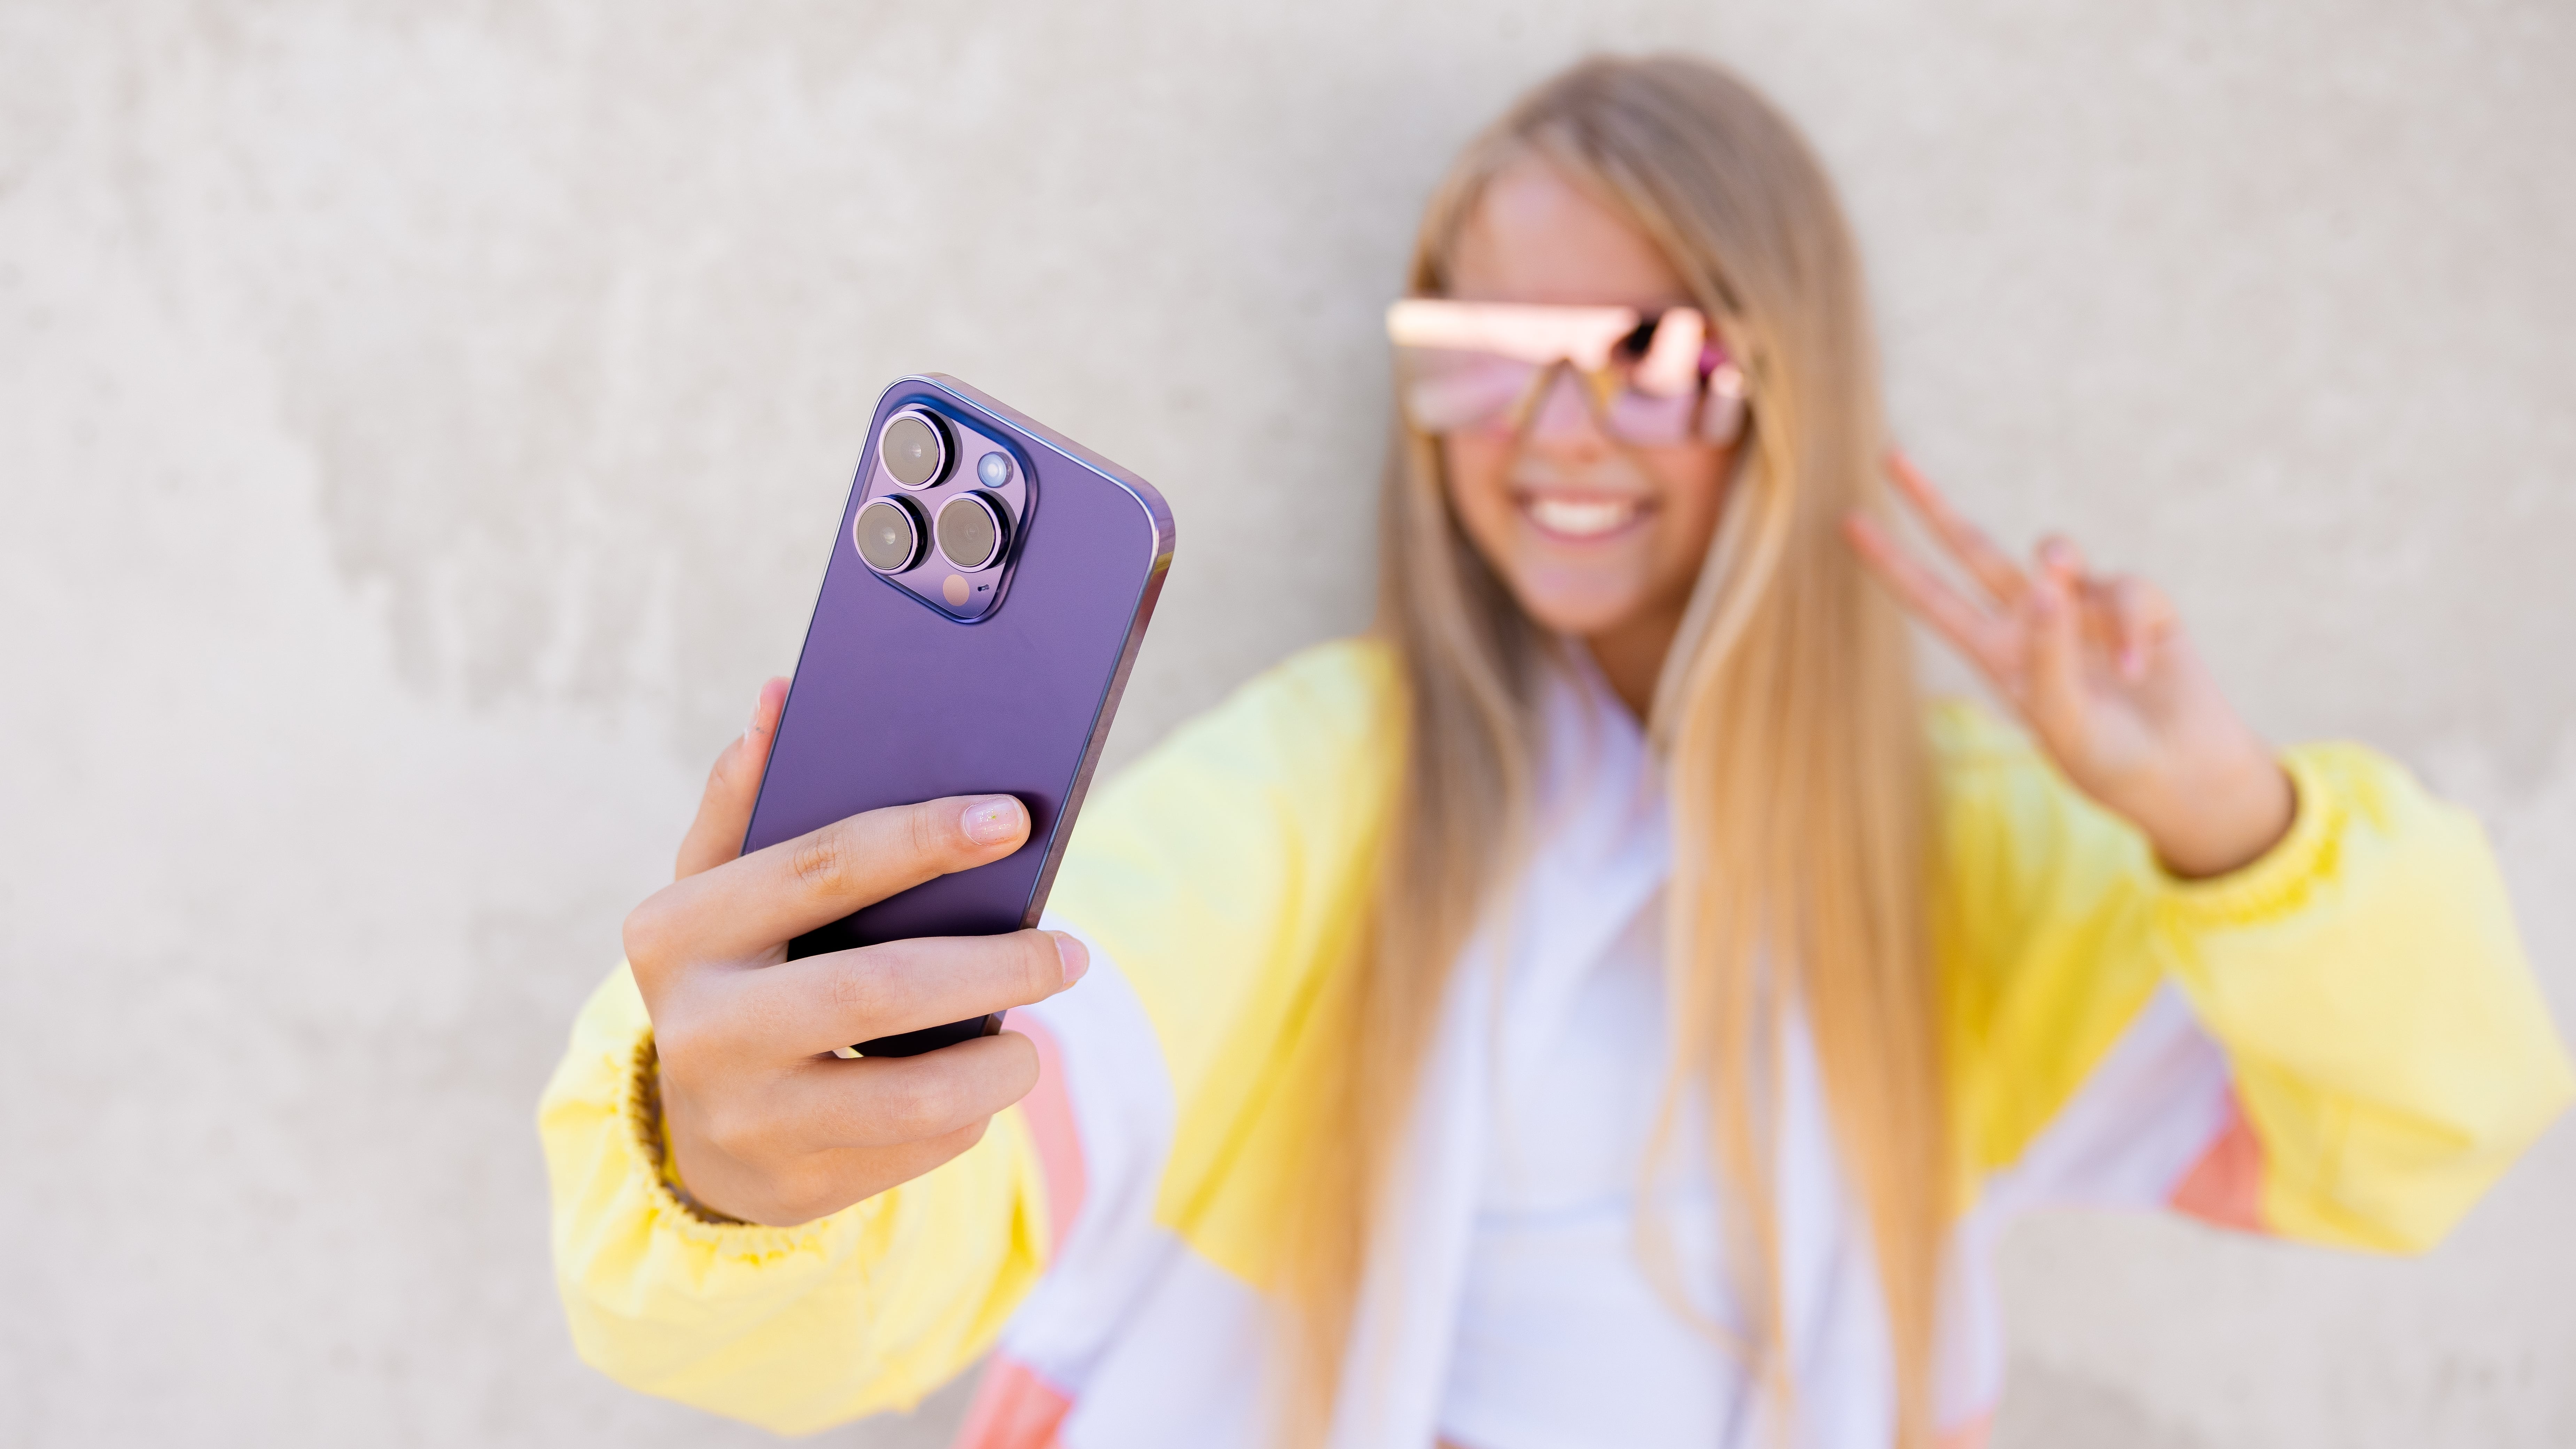 Young woman taking a selfie with an iPhone